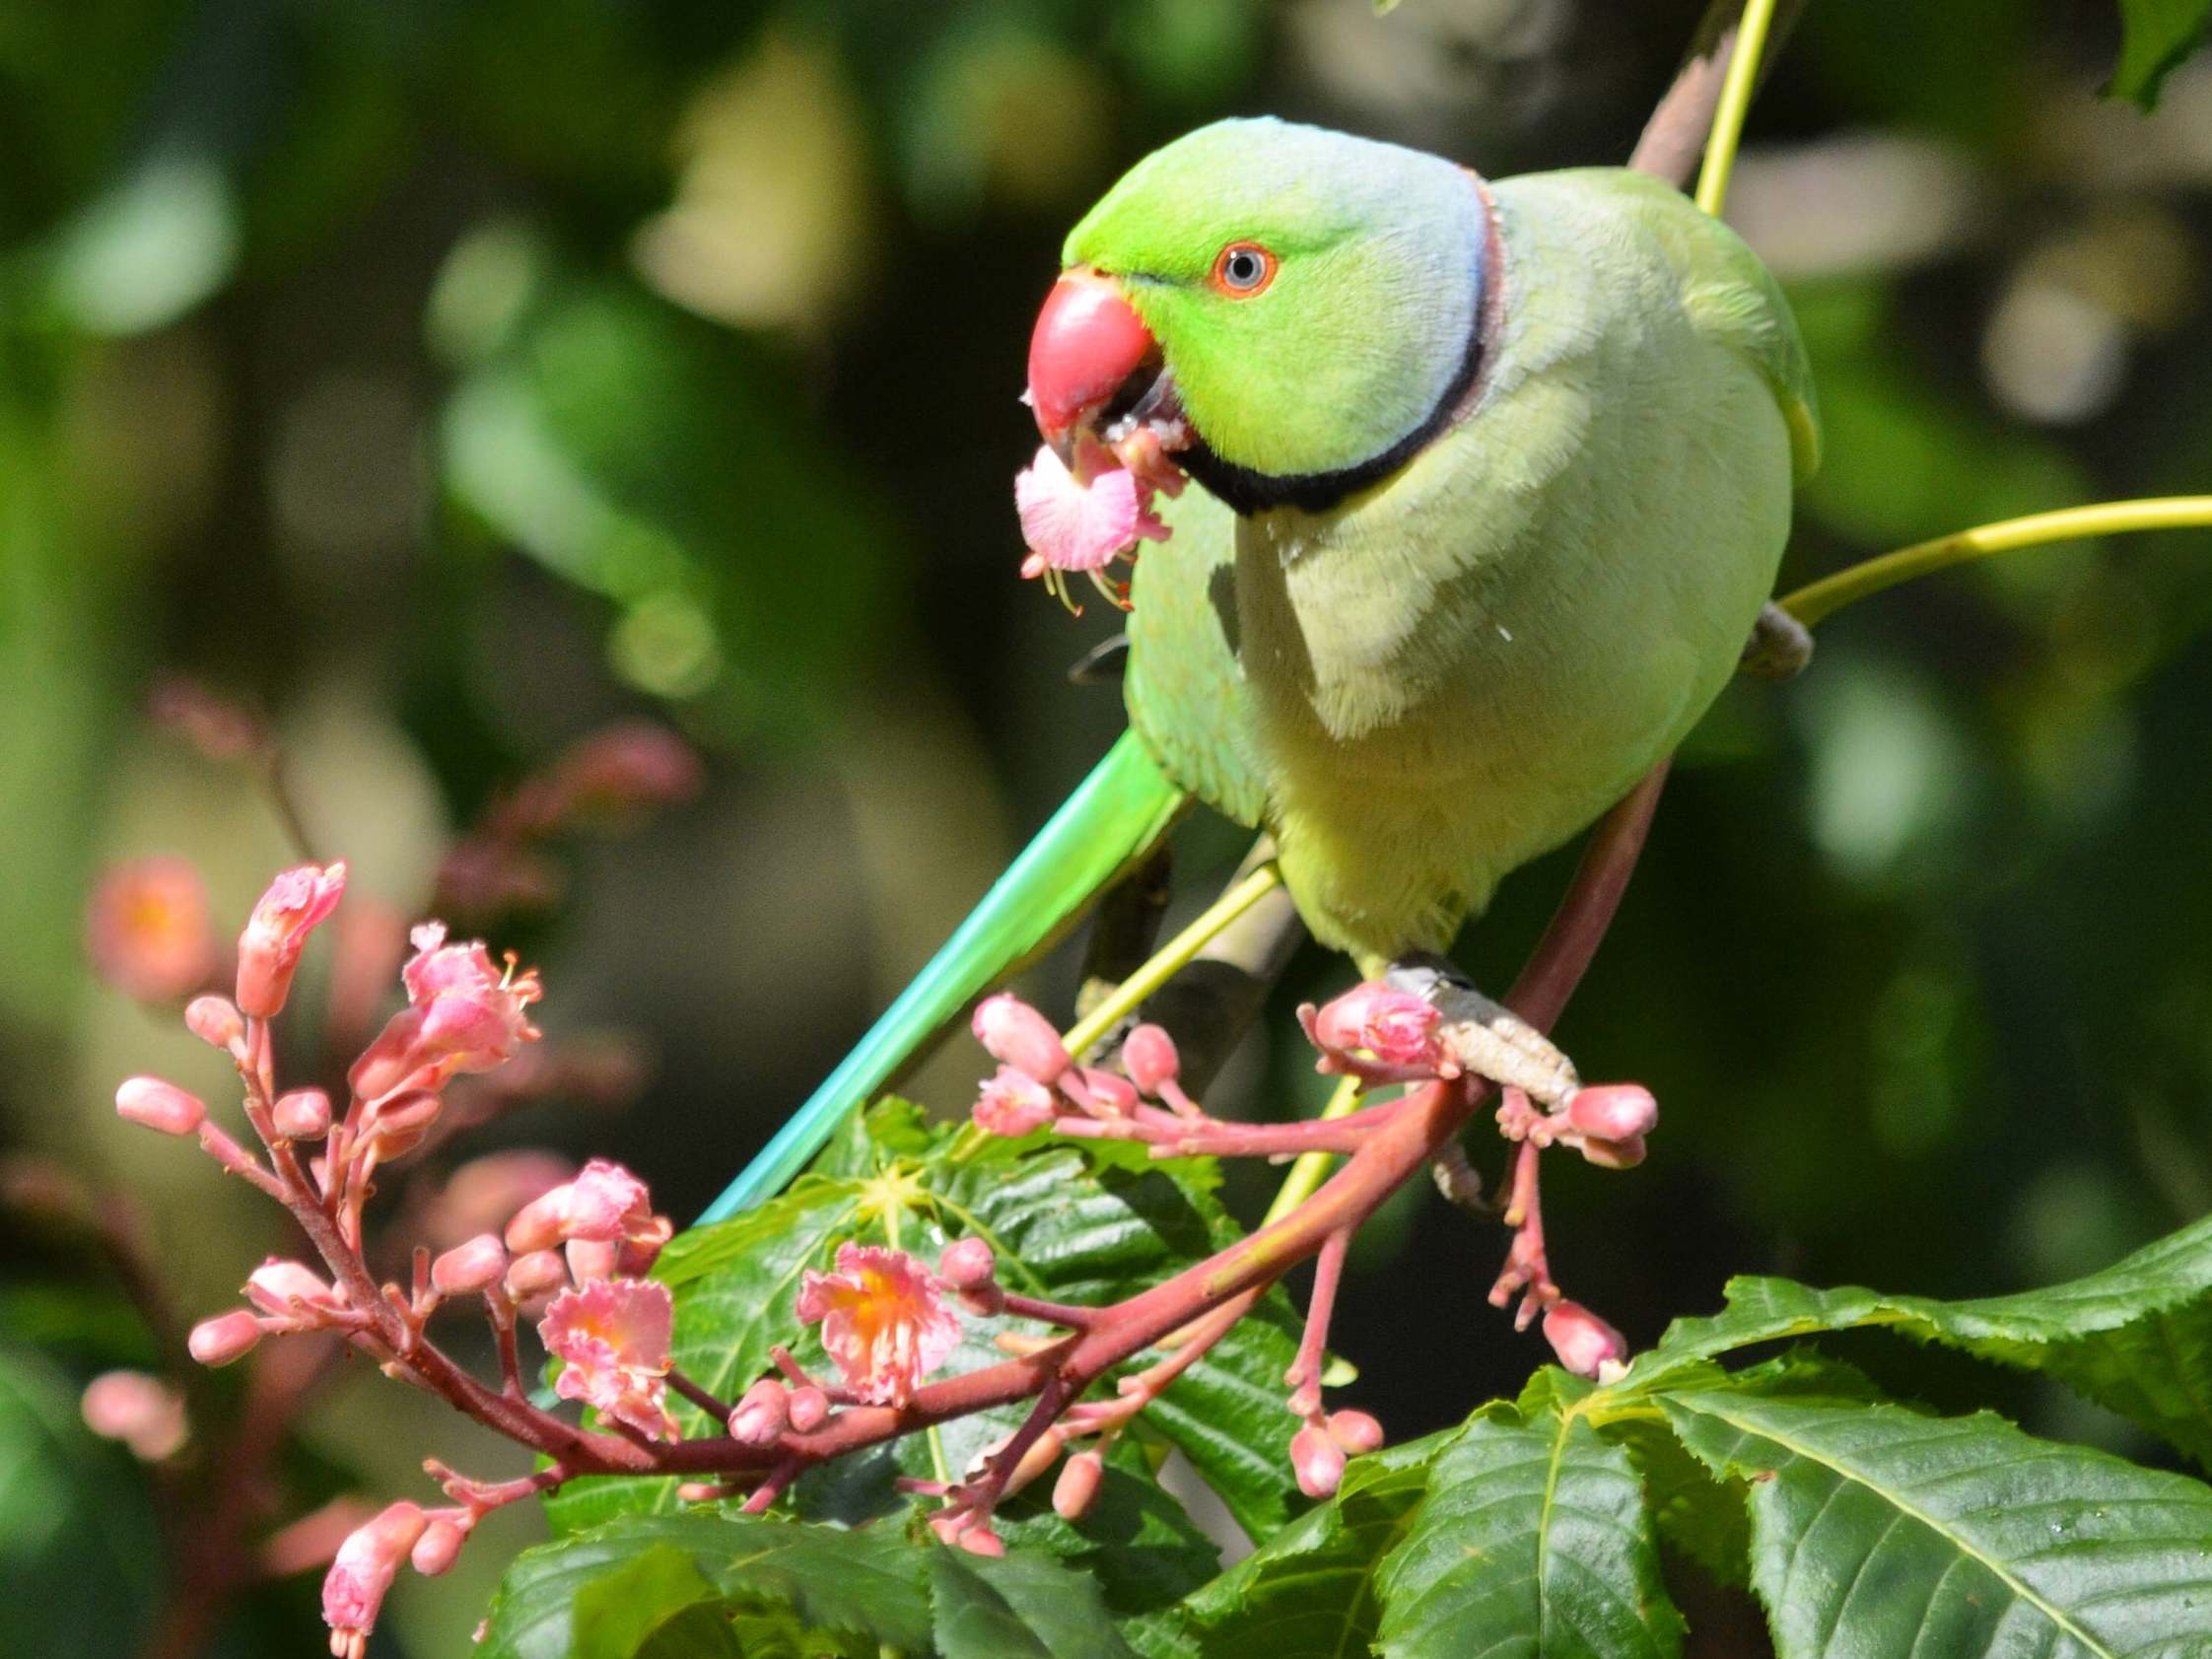 Ring-necked parakeets are now commonplace across some parts of the UK